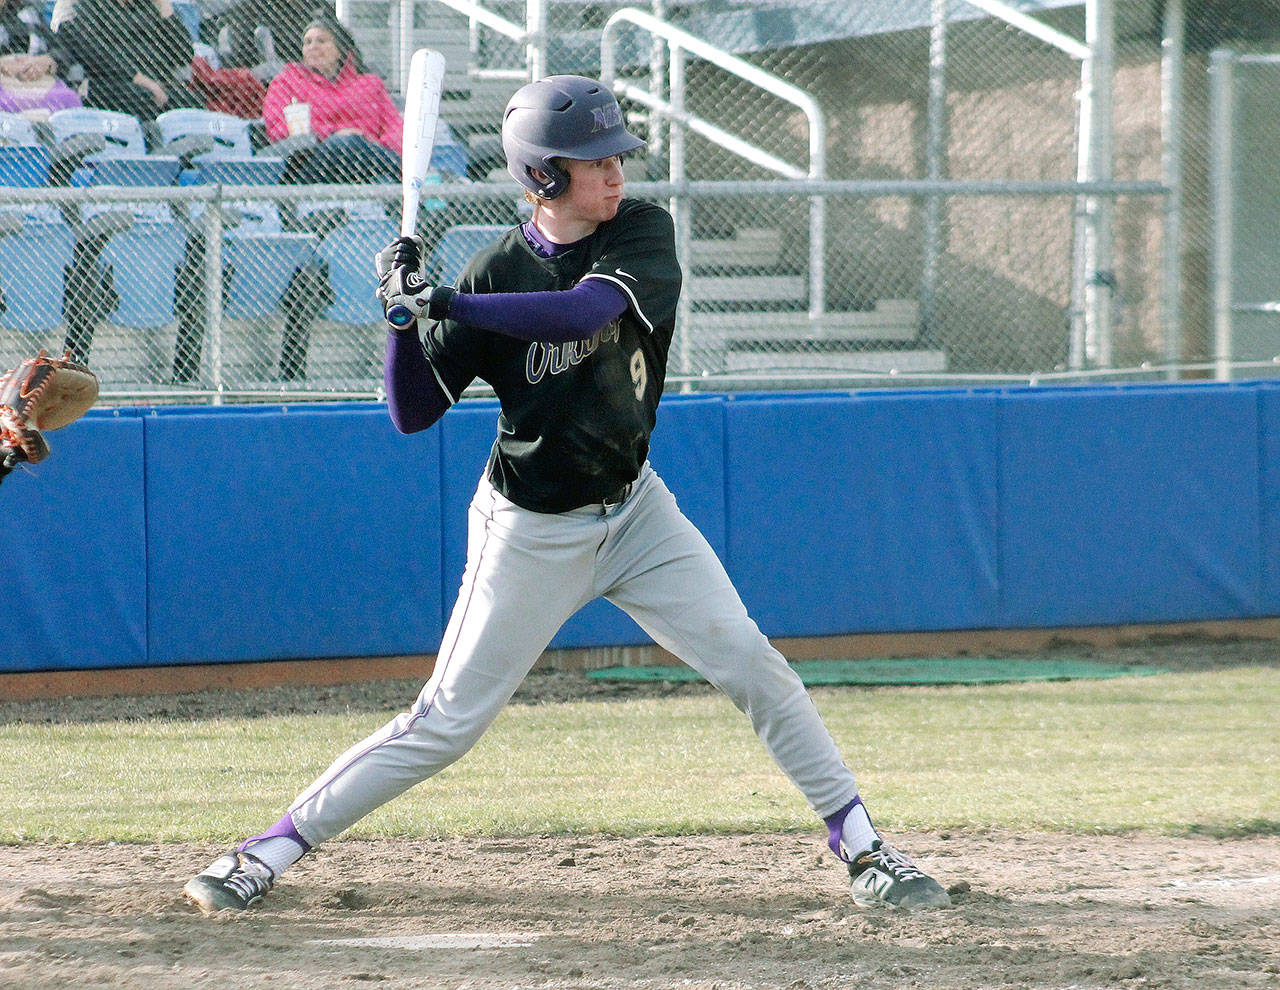 Chris Schuchart drove in one of North Kitsap’s four runs in the loss to Central Kitsap. (Mark Krulish/Kitsap News Group)